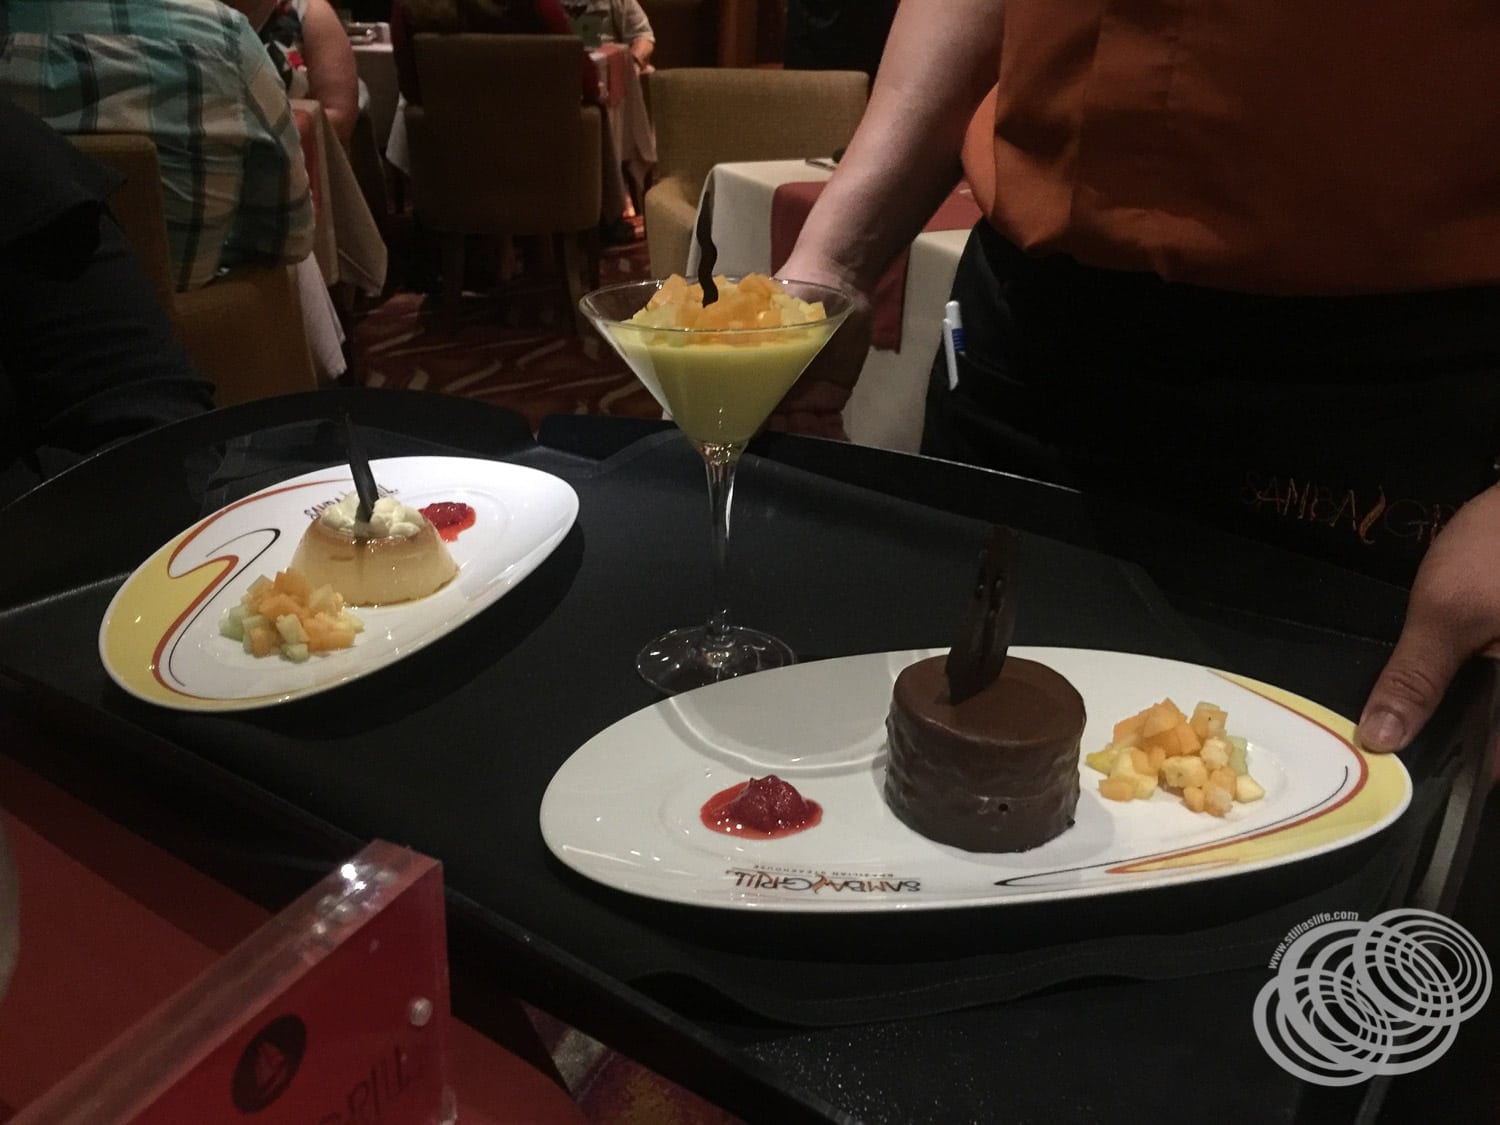 Samba Grill Dessert Choices from left to right: Creme Caramel, Pina colada panna cotta and Chocolate cake